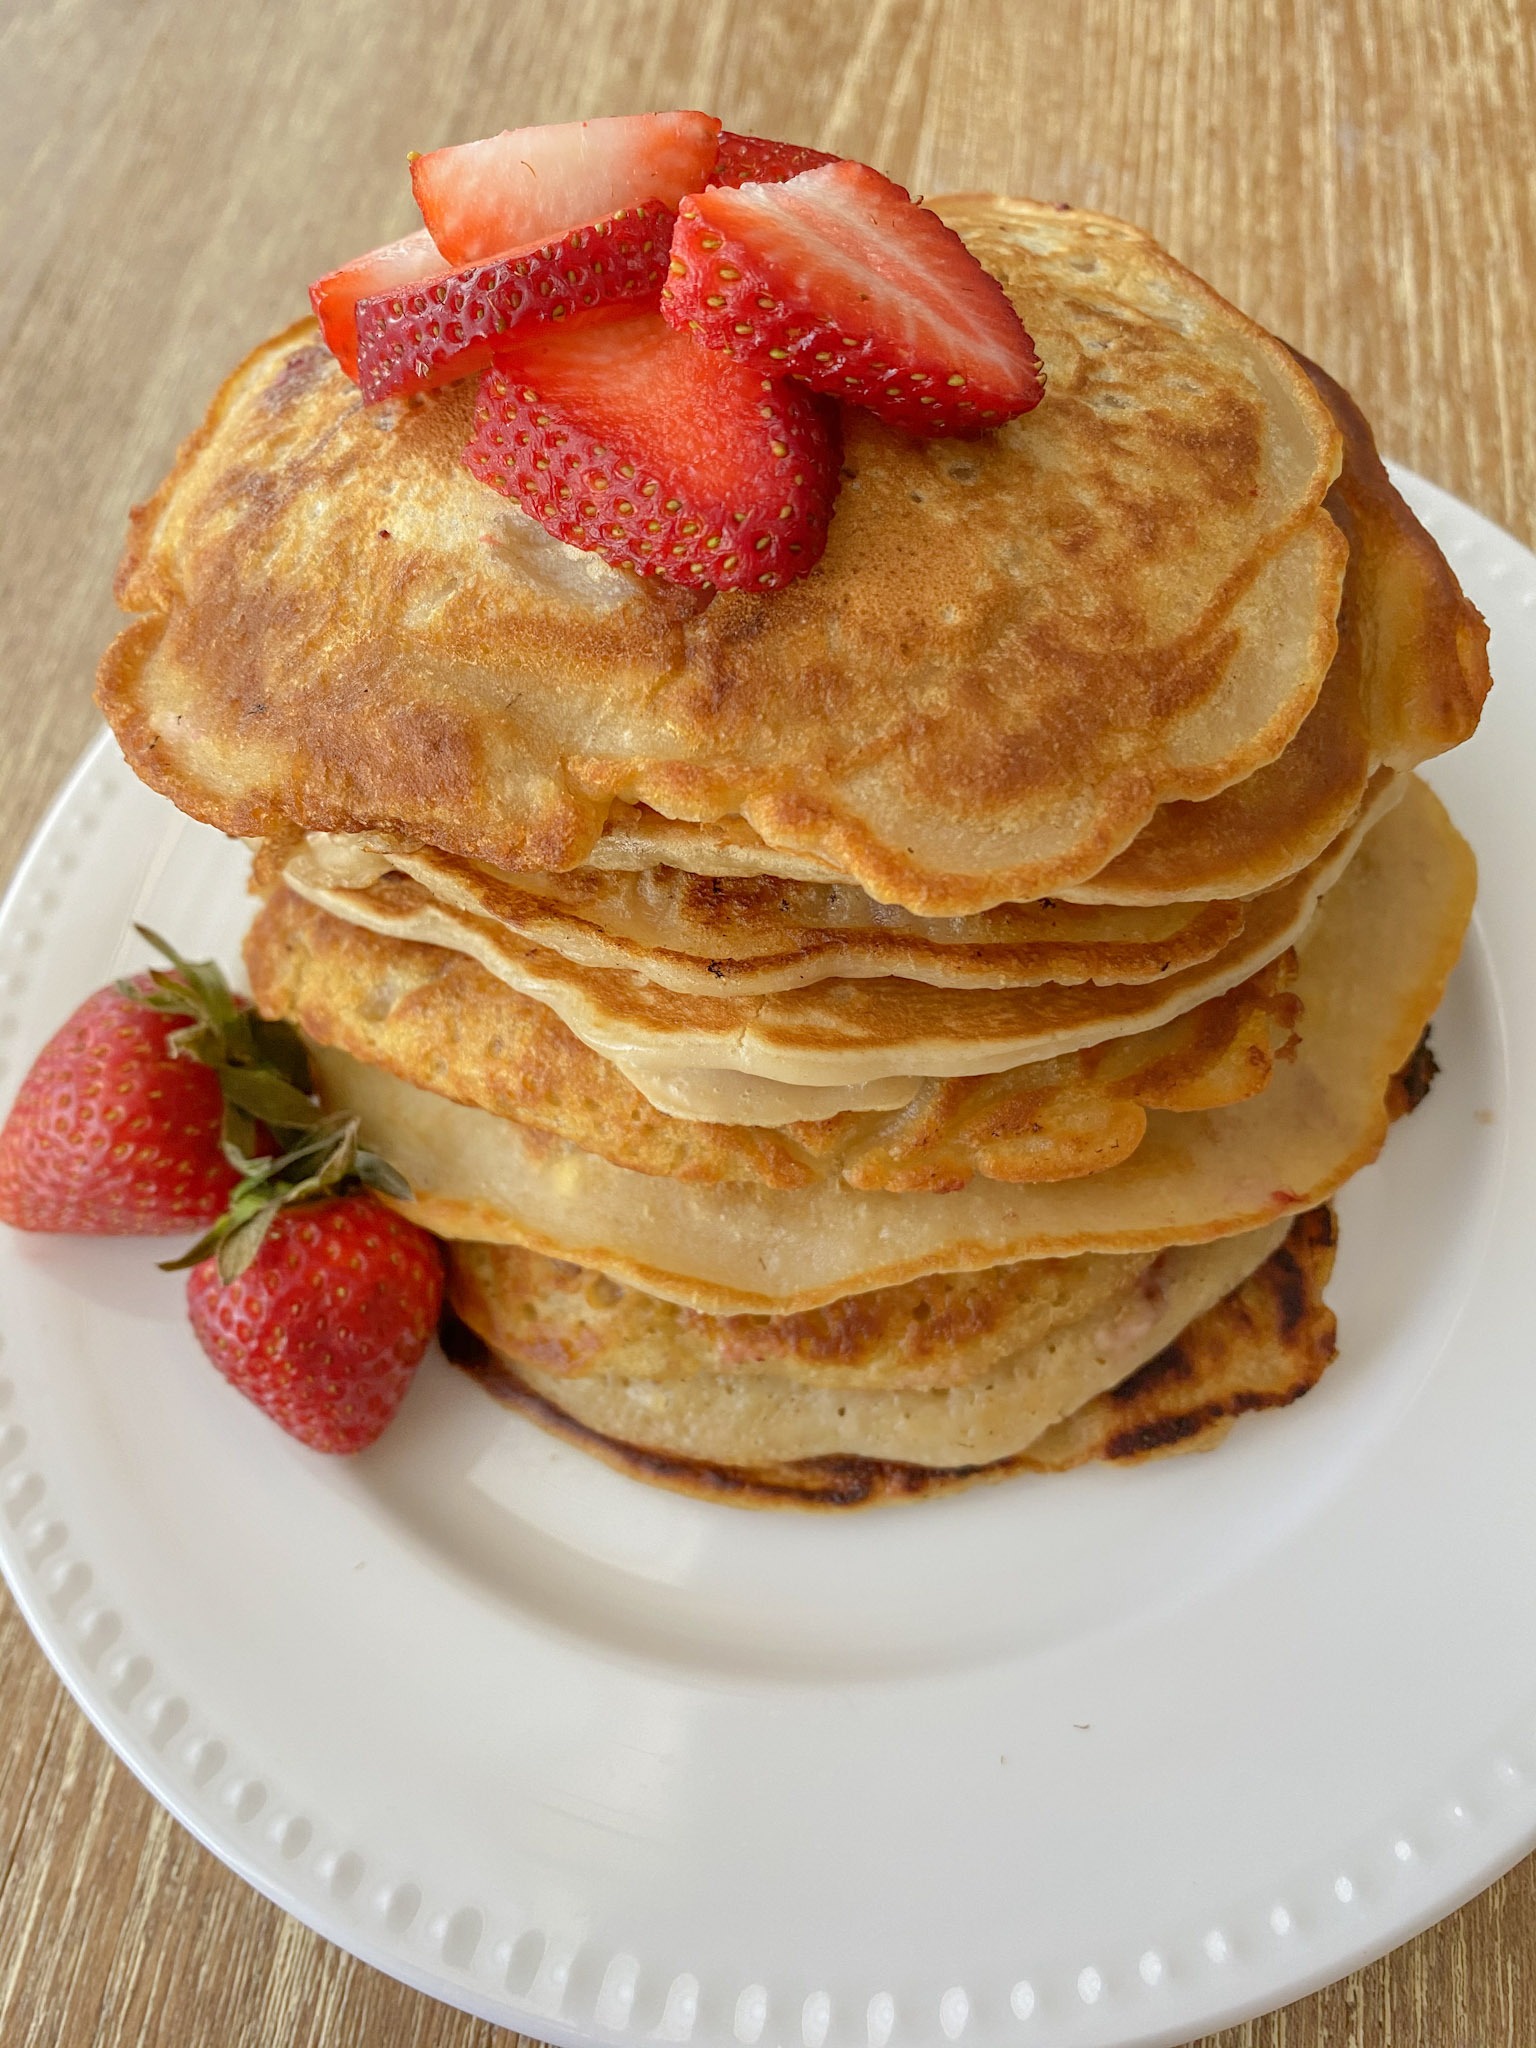 Strawberry pancakes served on a white plate with fresh strawberries.